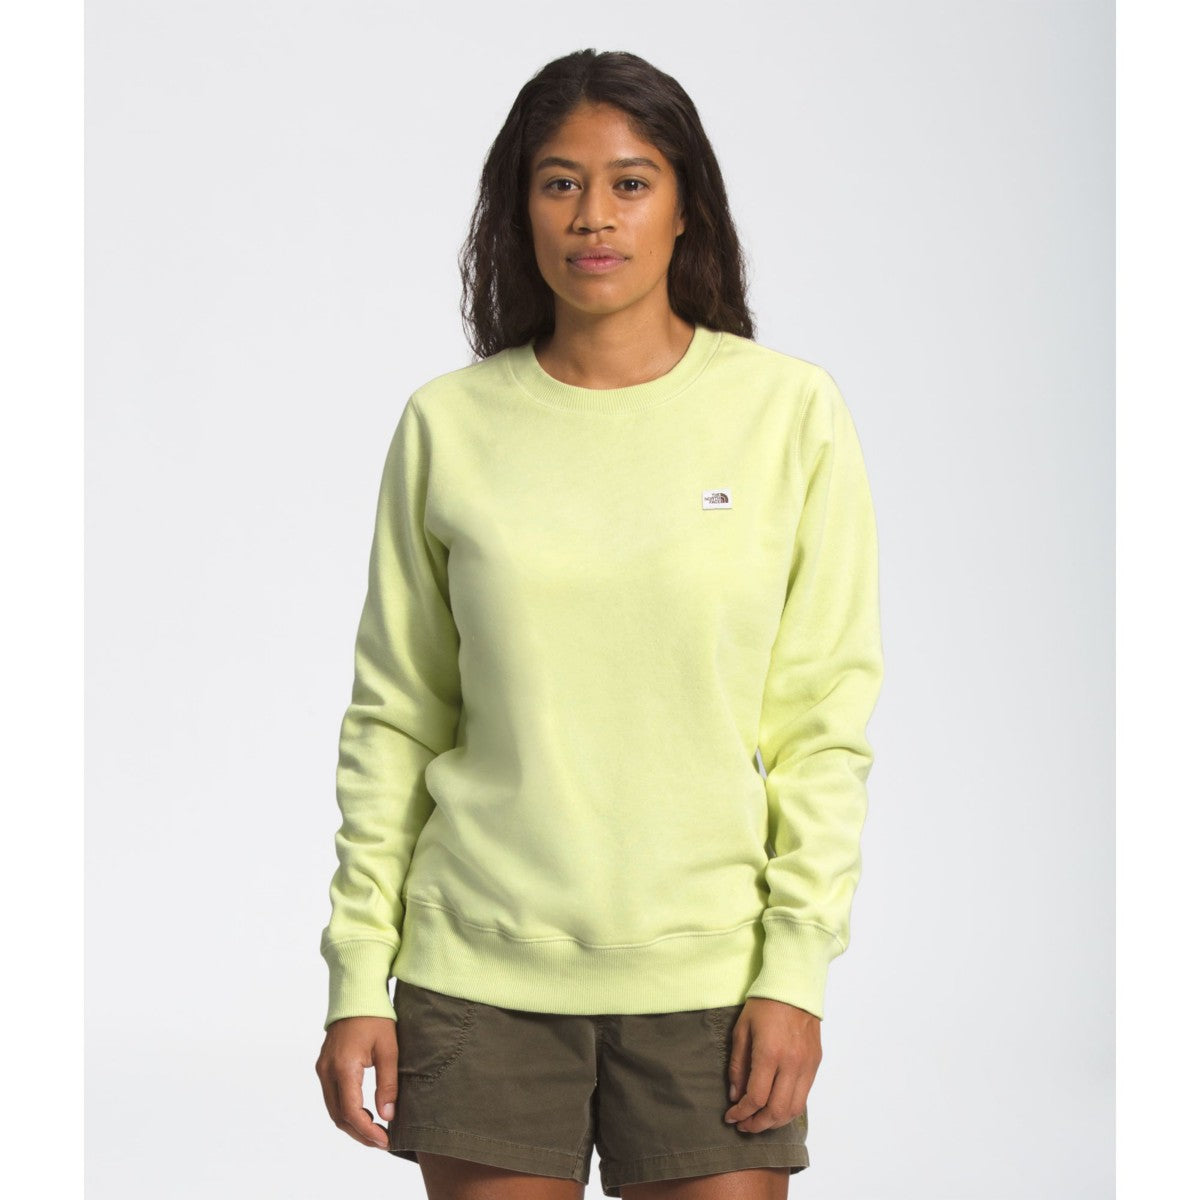 'The North Face' Women's Heritage Patch Crew Sweatshirt - Pale Lime Yellow